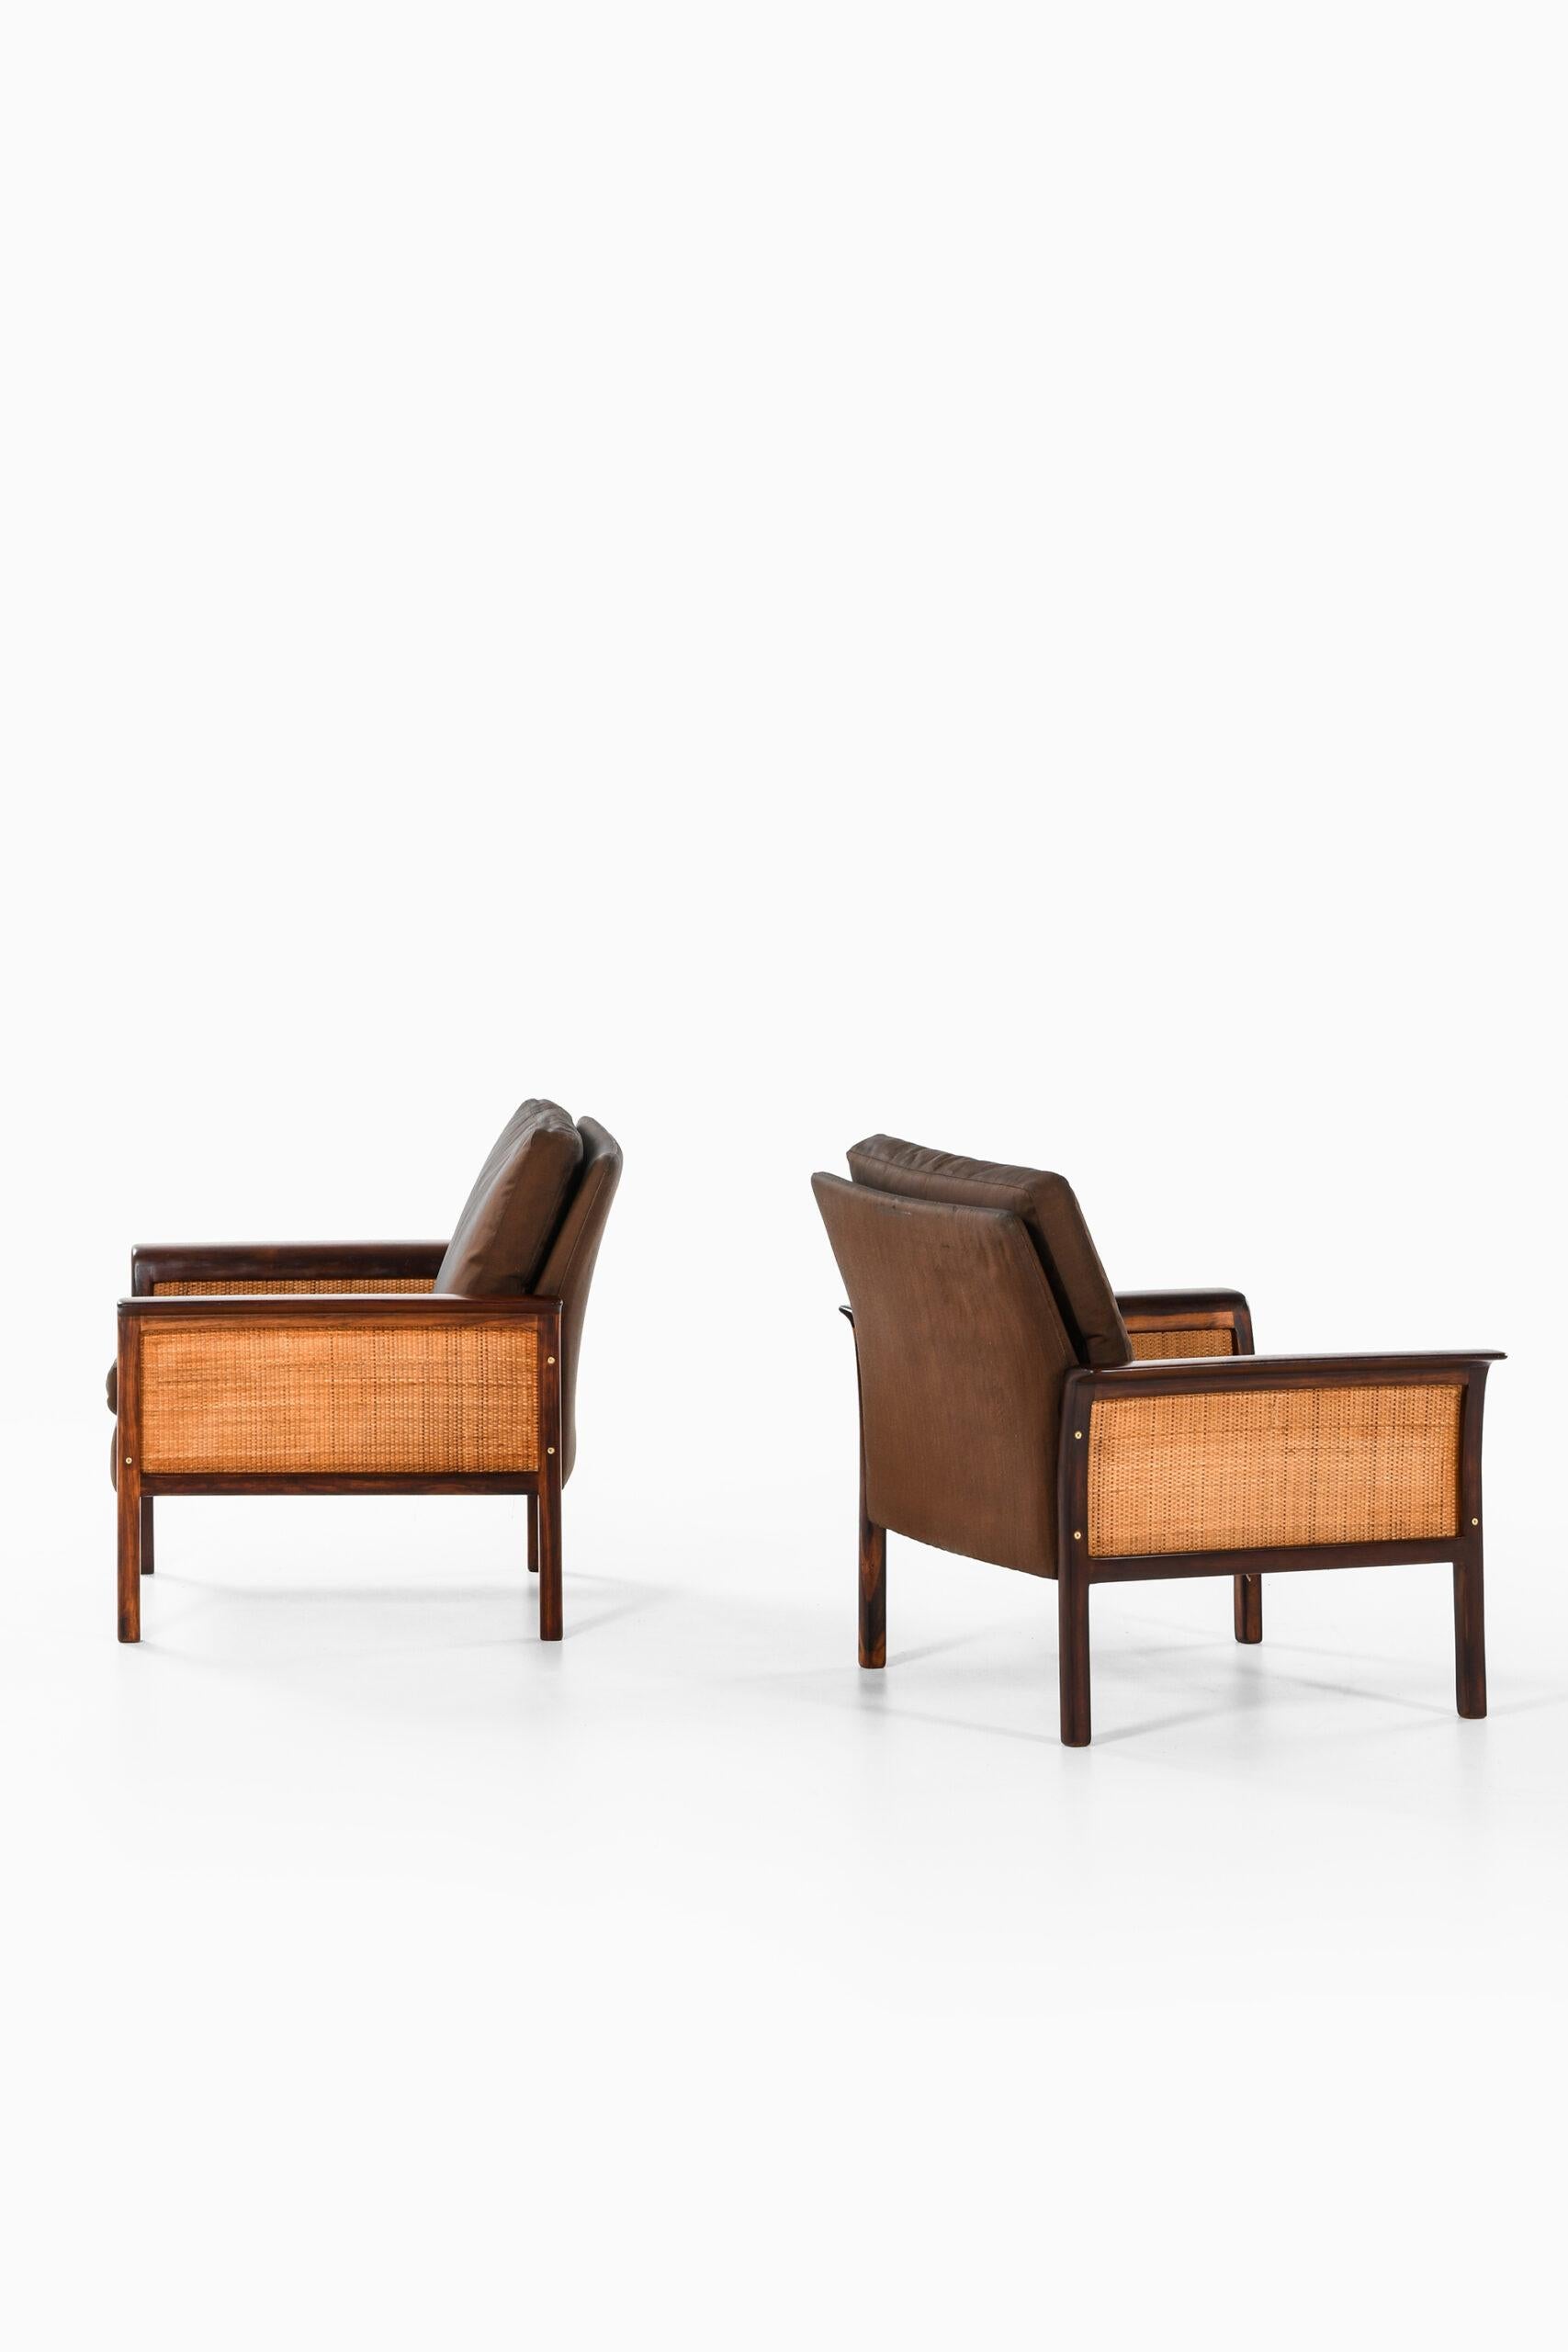 Mid-20th Century Hans Olsen Easy Chairs Model 500 Produced by C/S Møbler For Sale